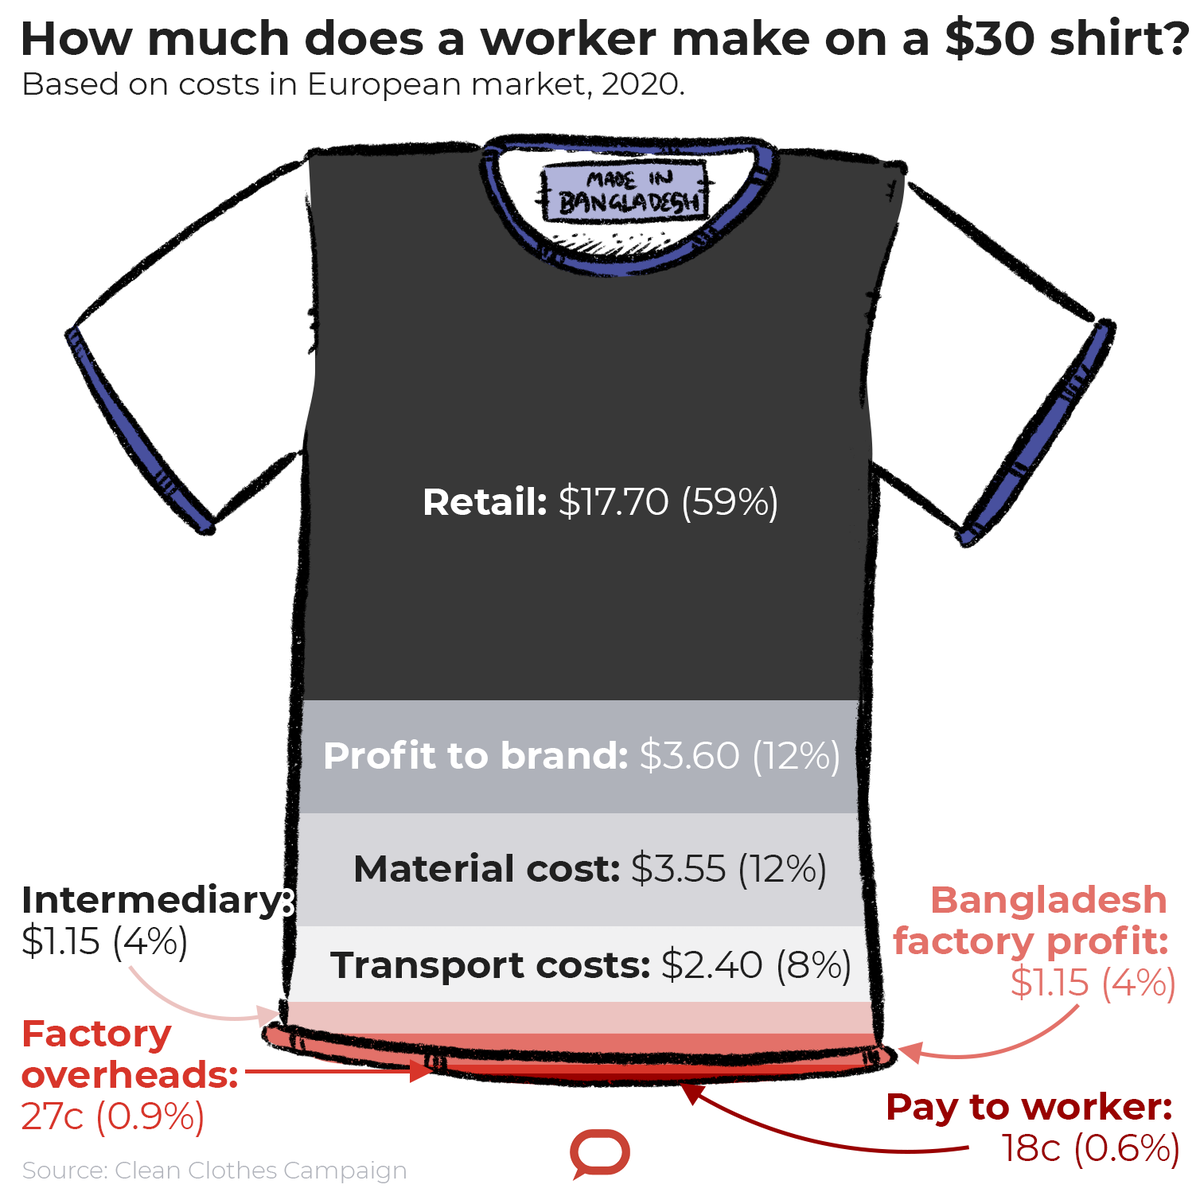 A graphic showing that for a $30 shirt, retail makes the most at $17.70 and worker makes the least at $0.18